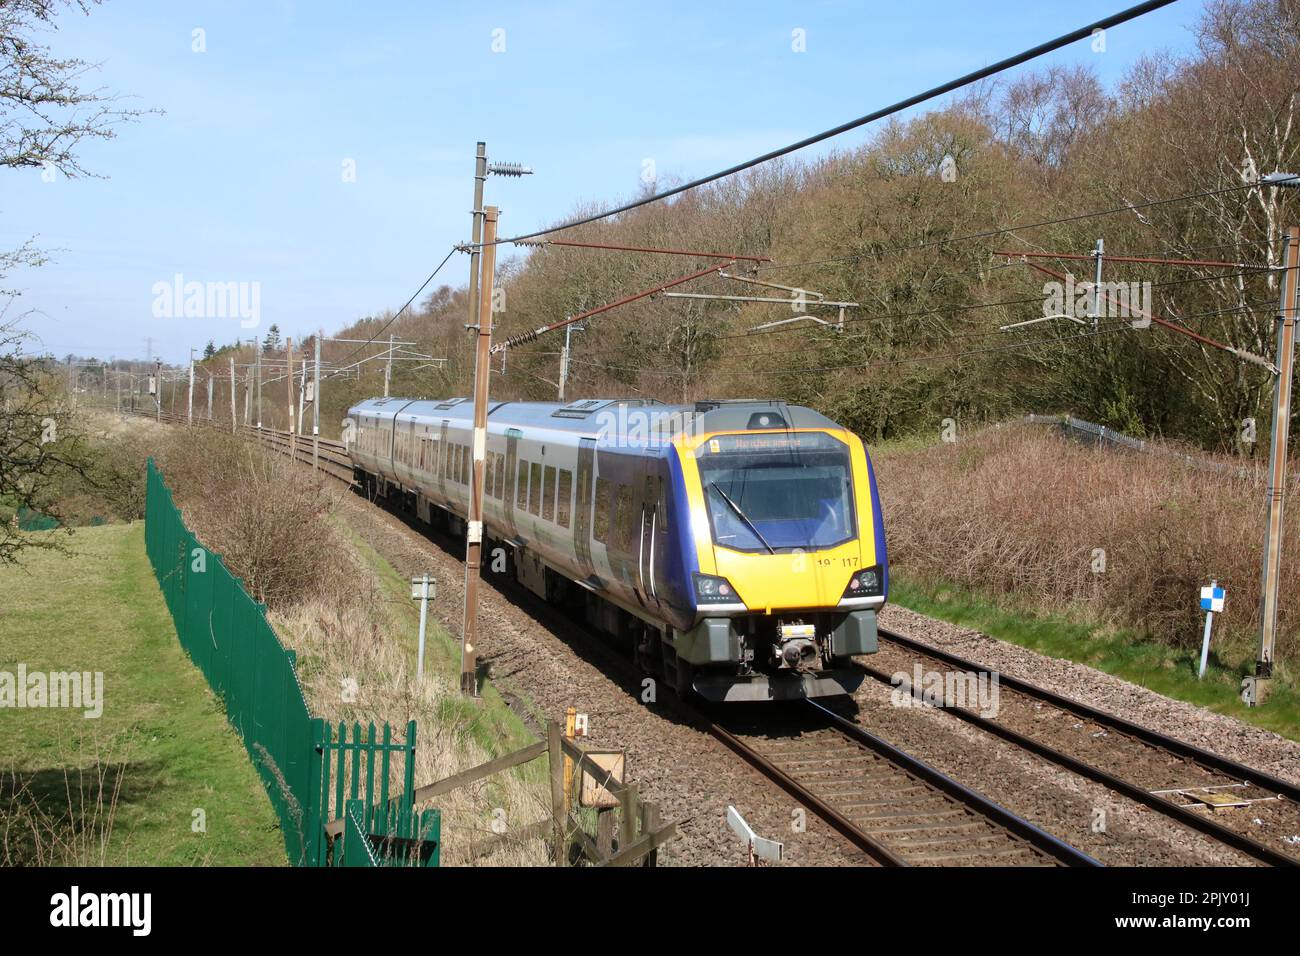 Northern trains civity class 195 dmu, 195117, passing along the West Coast Main Line in the Lancashire countryside near Scorton on 4th April 2023. Stock Photo